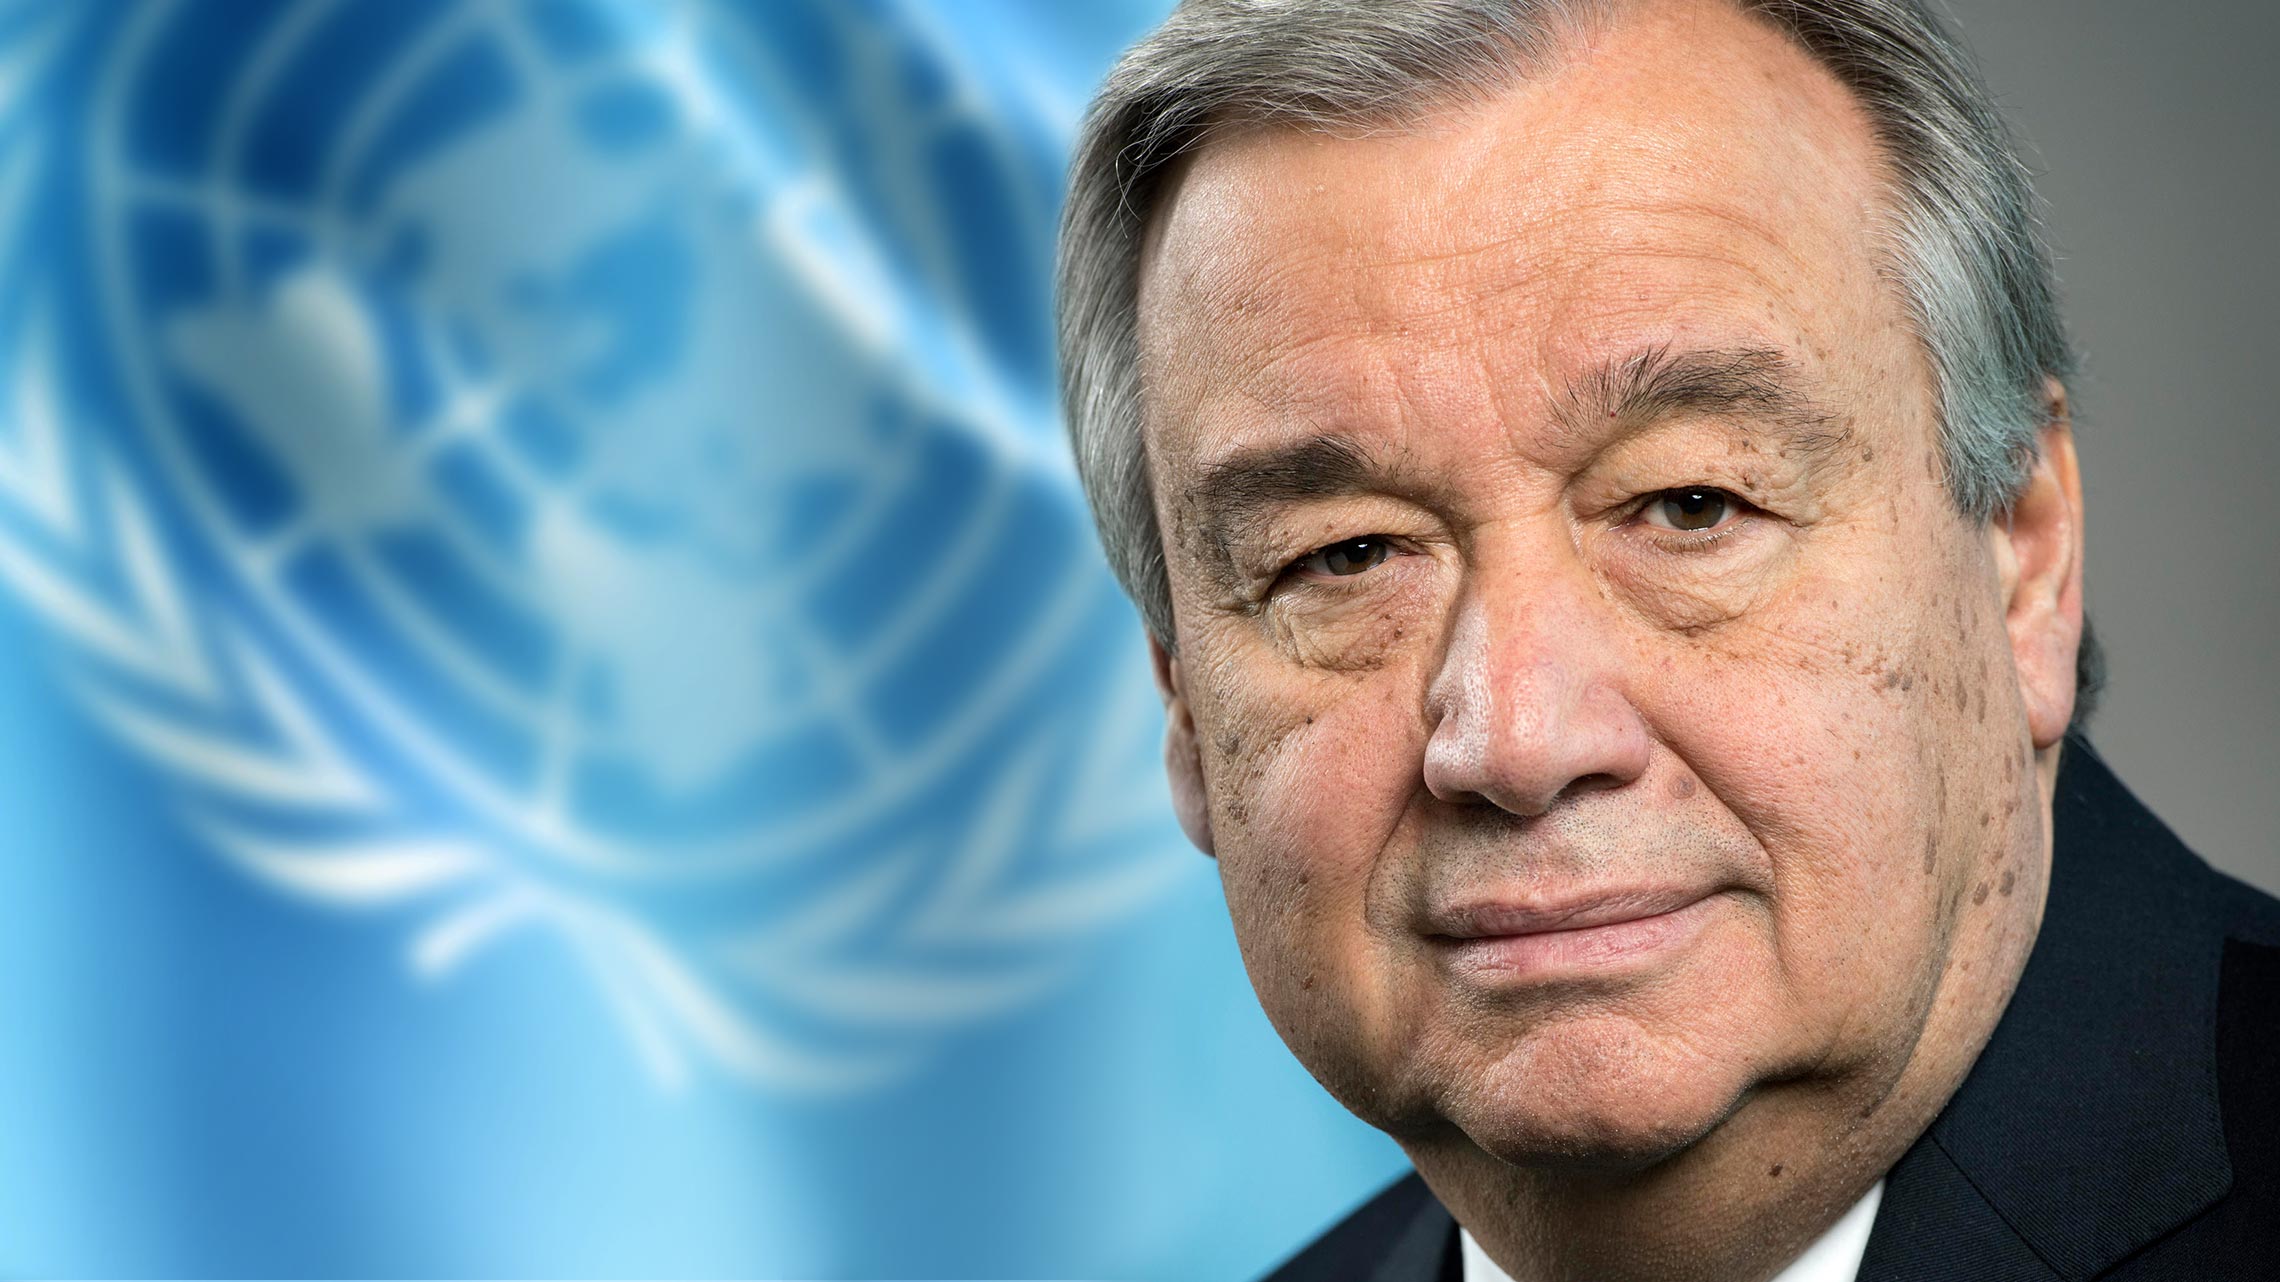 Mr. António Guterres, Secretary-General of the United Nations 